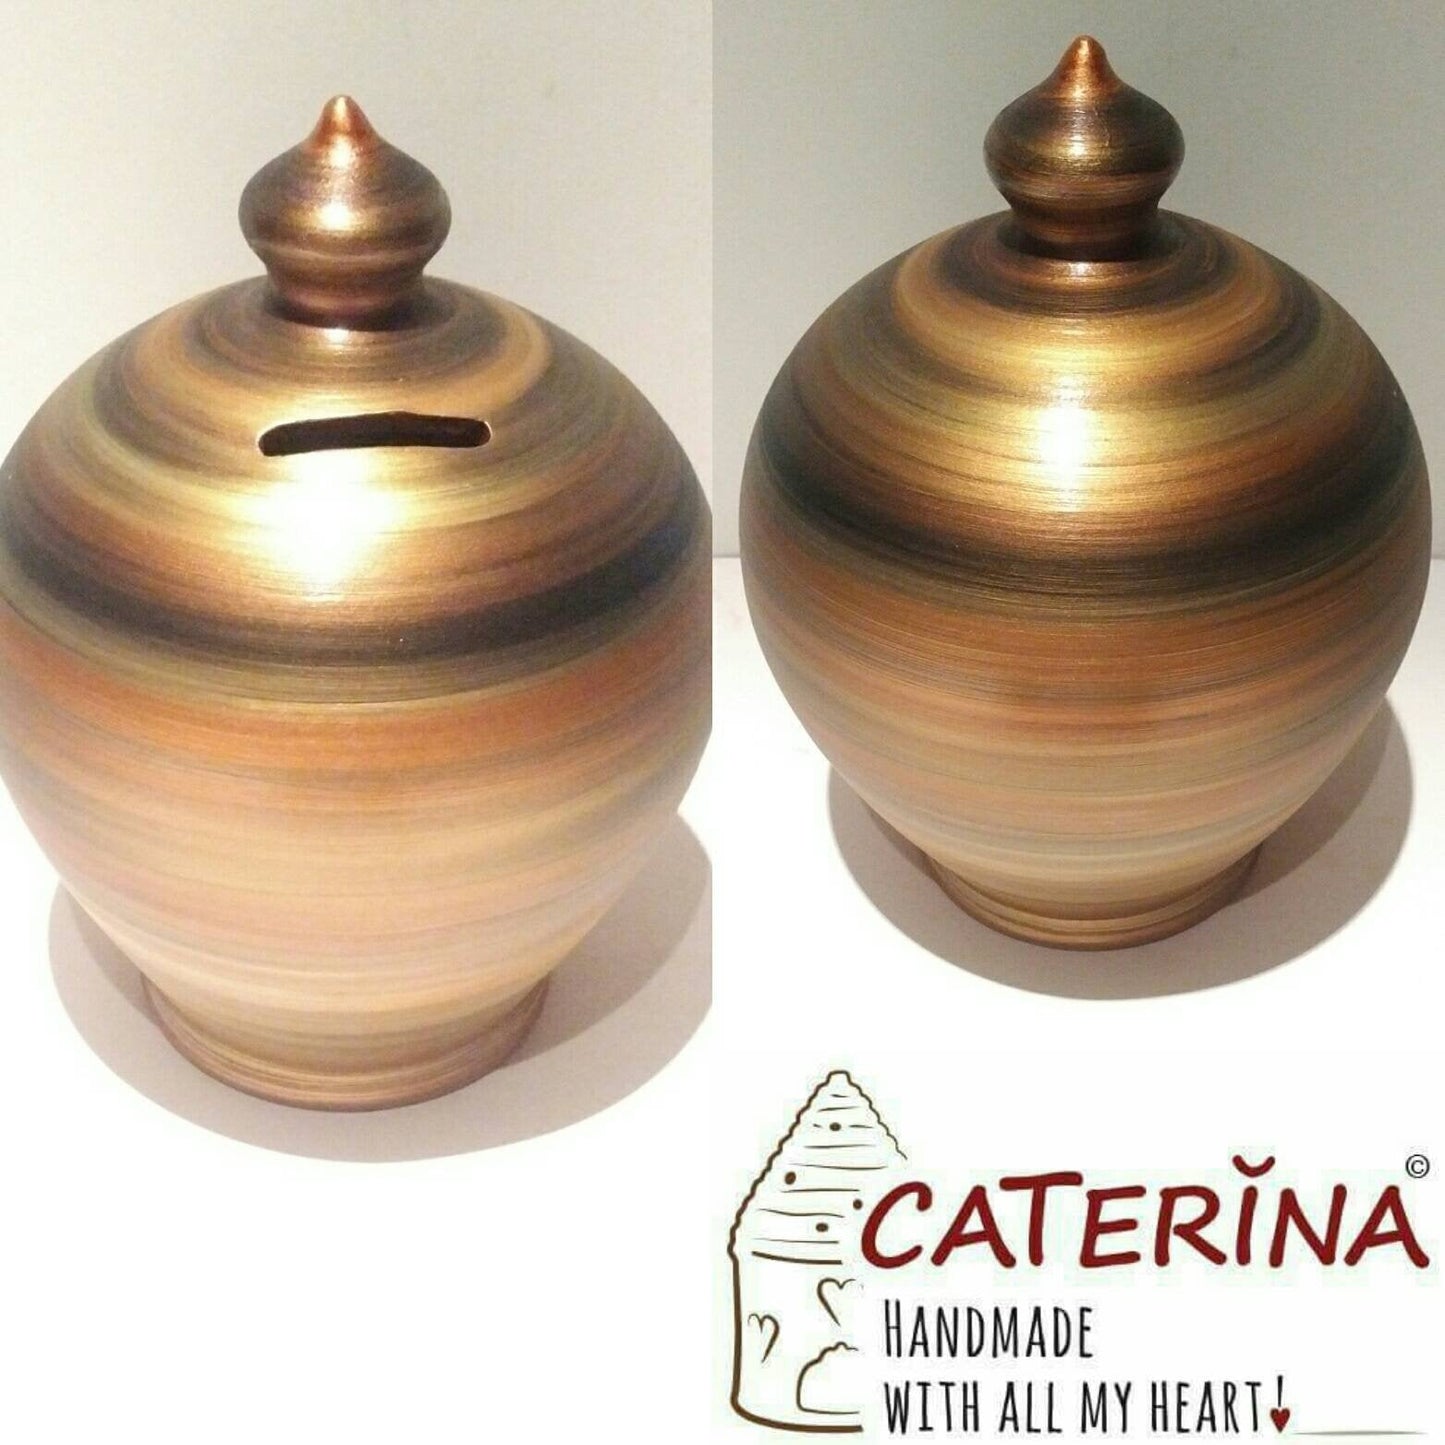 Adult Piggy Bank. Made to order. Size: 25 cm = 9.8425 Inches.  Colors: Copper, Gold and Black, as in picture. With hole and stopper plug, or without hole. This item is entirely handmade and hand-painted with acrylic colors, and is signed by me at the bottom.